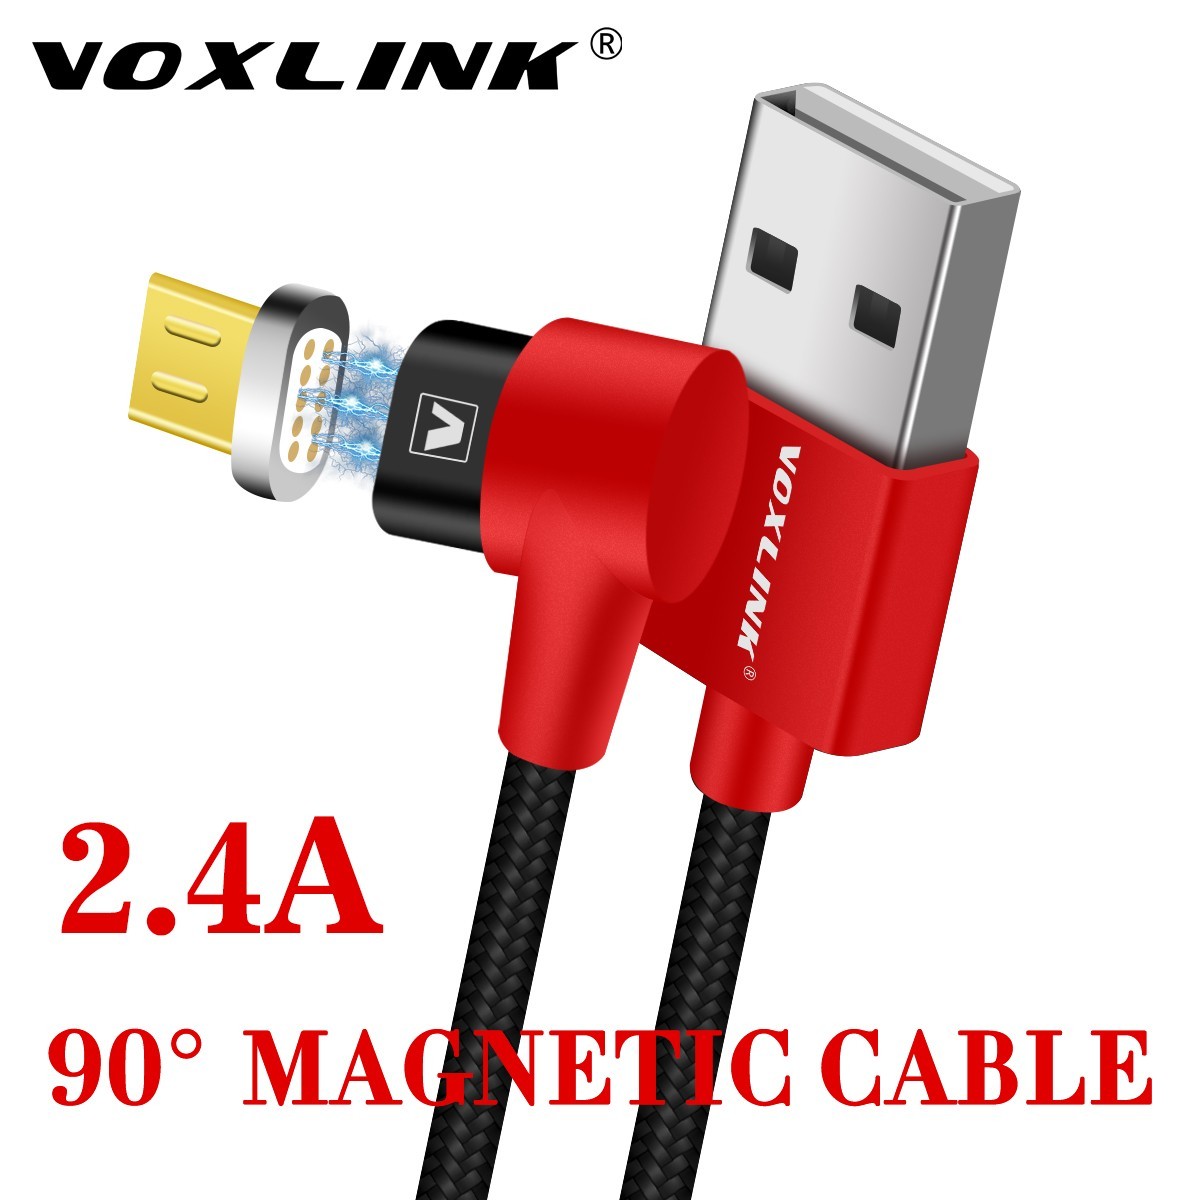 VOXLINK 90 Degree Magnetic Cable mirco usb Right Angle 2.4A Fast Charging Nylon USB Charger Cable for Huawei xiaomi Samsung LG-red